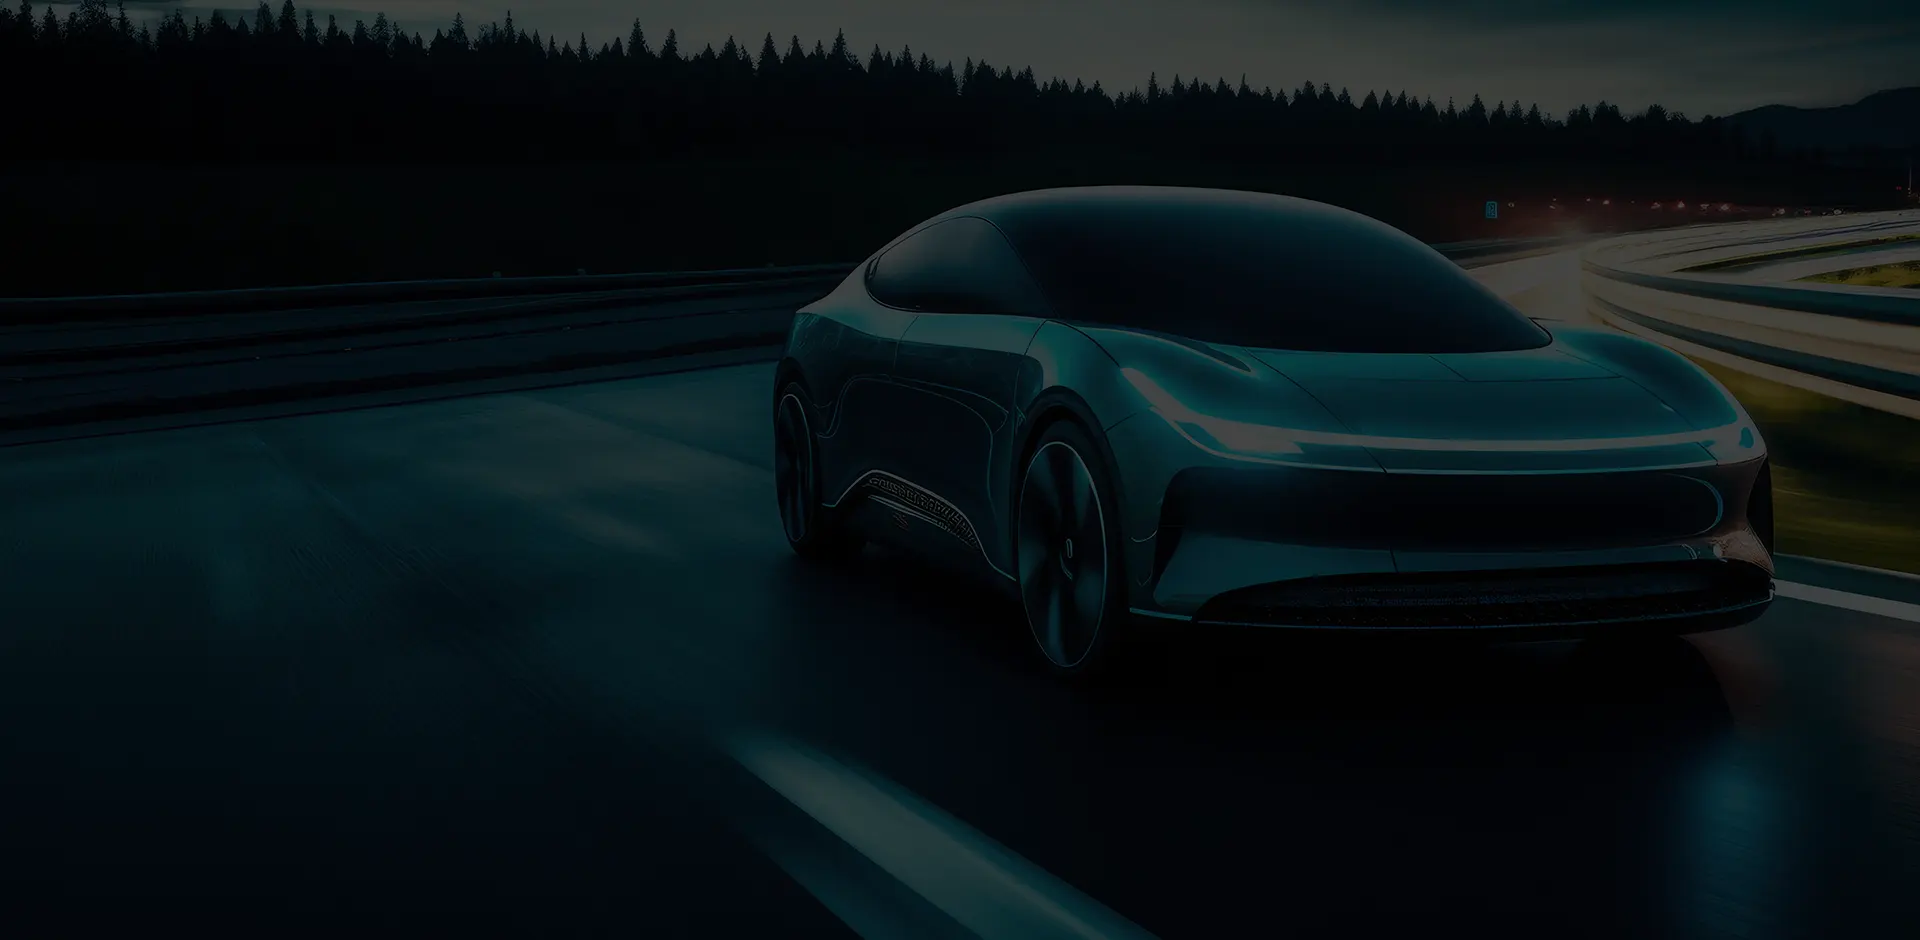 The future of the car is here